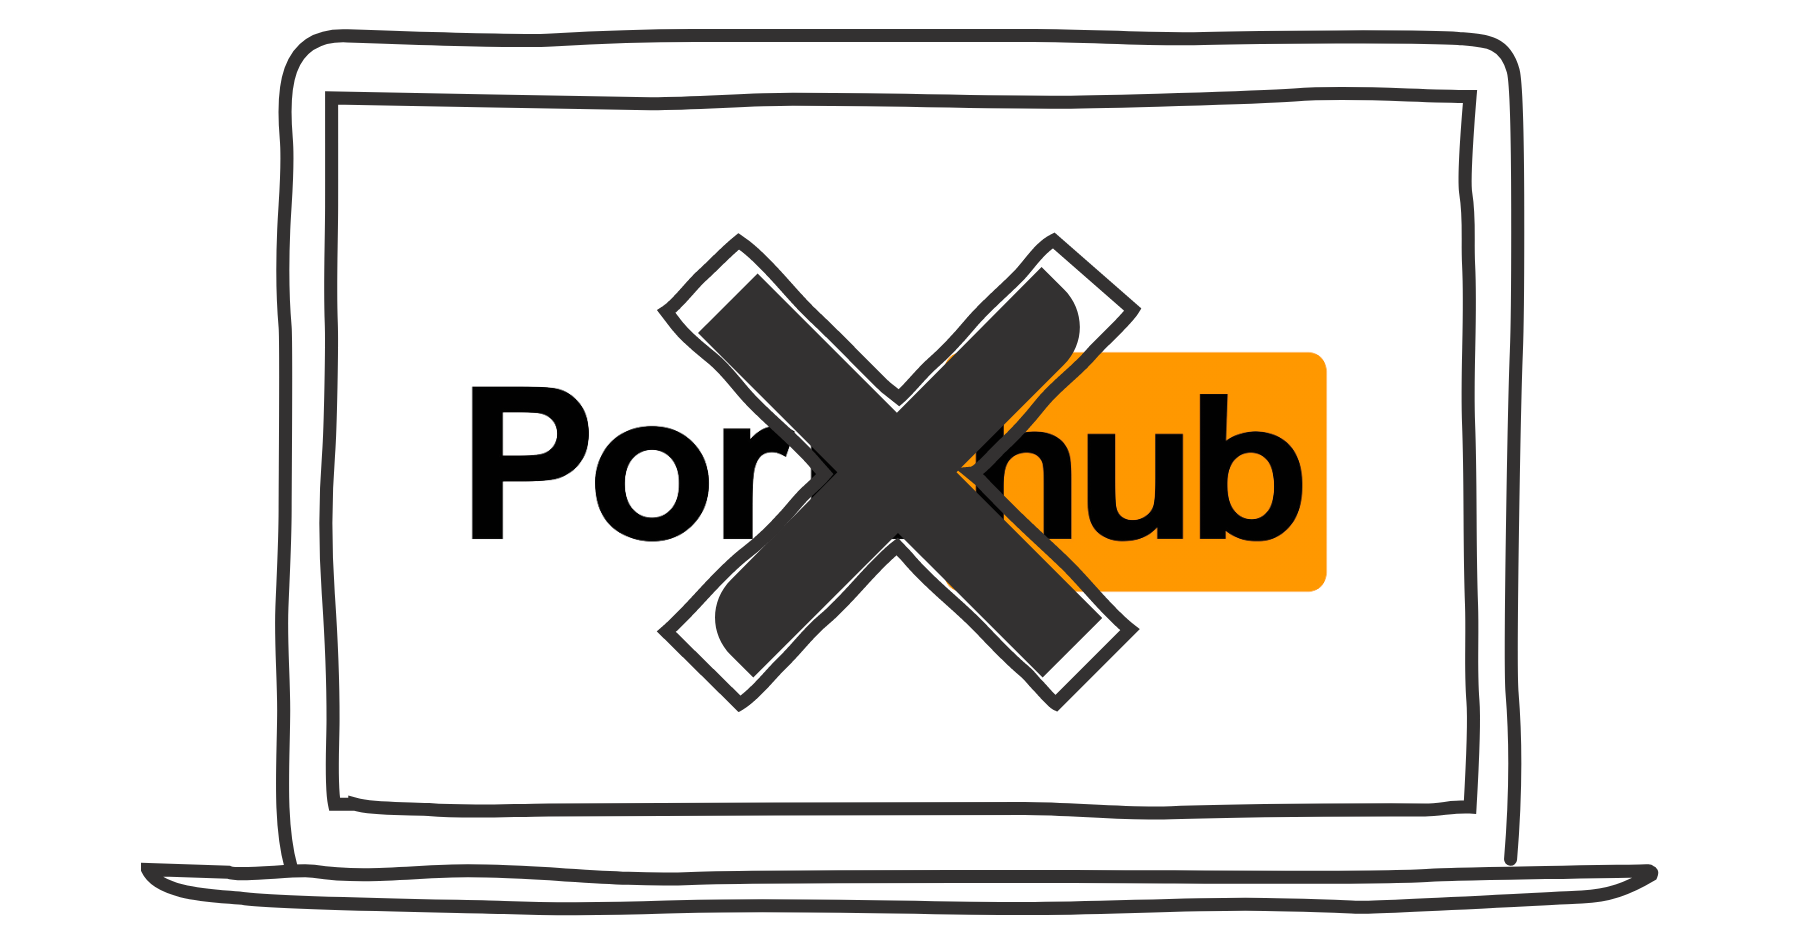 Image of Pornhub logo crossed out on laptop screen representing the failure of pornography regulation